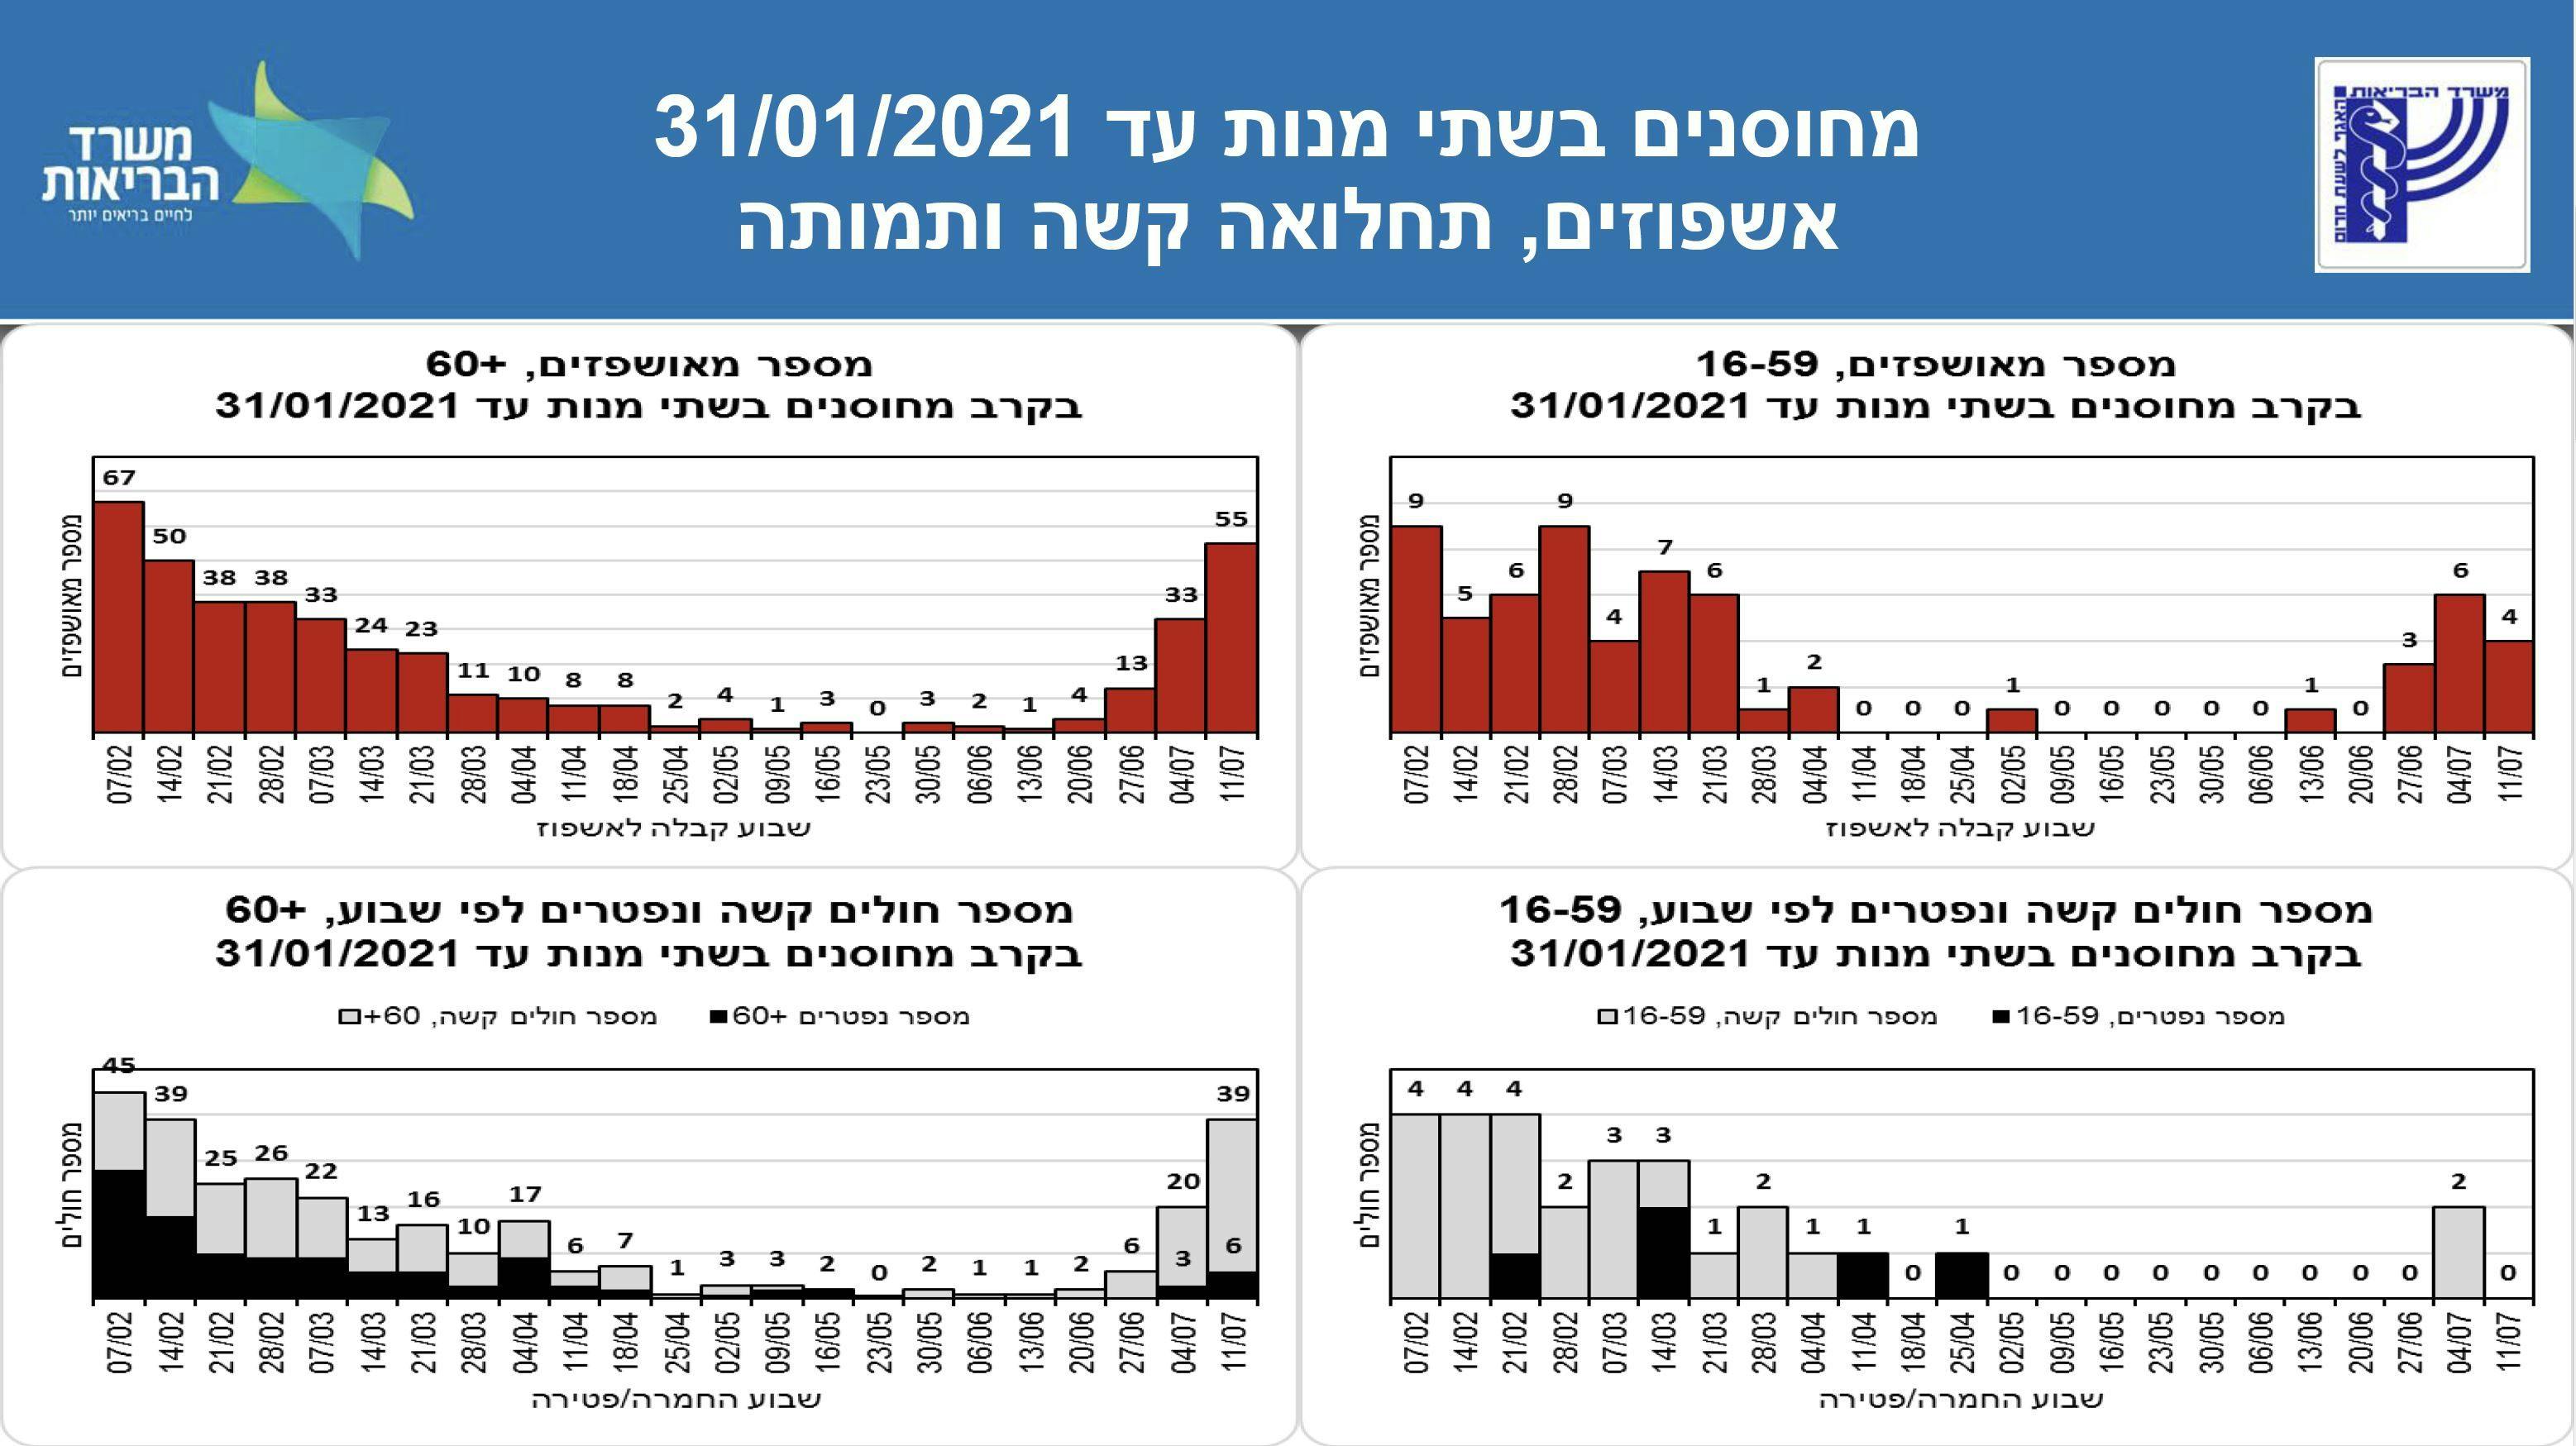 Source: Ministry of Health of Israel
Slide Translation:
Title: Vaccinated in two doses by 31/01/2021 (Jan. 31, 2021)
Hospitalizations, severe morbidity and mortality
Red separated by age: how many vaccinated people hospitalized
Vertical Axis Red: Number of people hospitalized
Horizontal Axis: Week of Hospitalization
Black/gray: how many life threatening situations (gray) and deaths (black).
Vertical Axis: Number of People with Life threatening illness (Black is dead)
Horizontal Axis: Week of difficult cases or death

